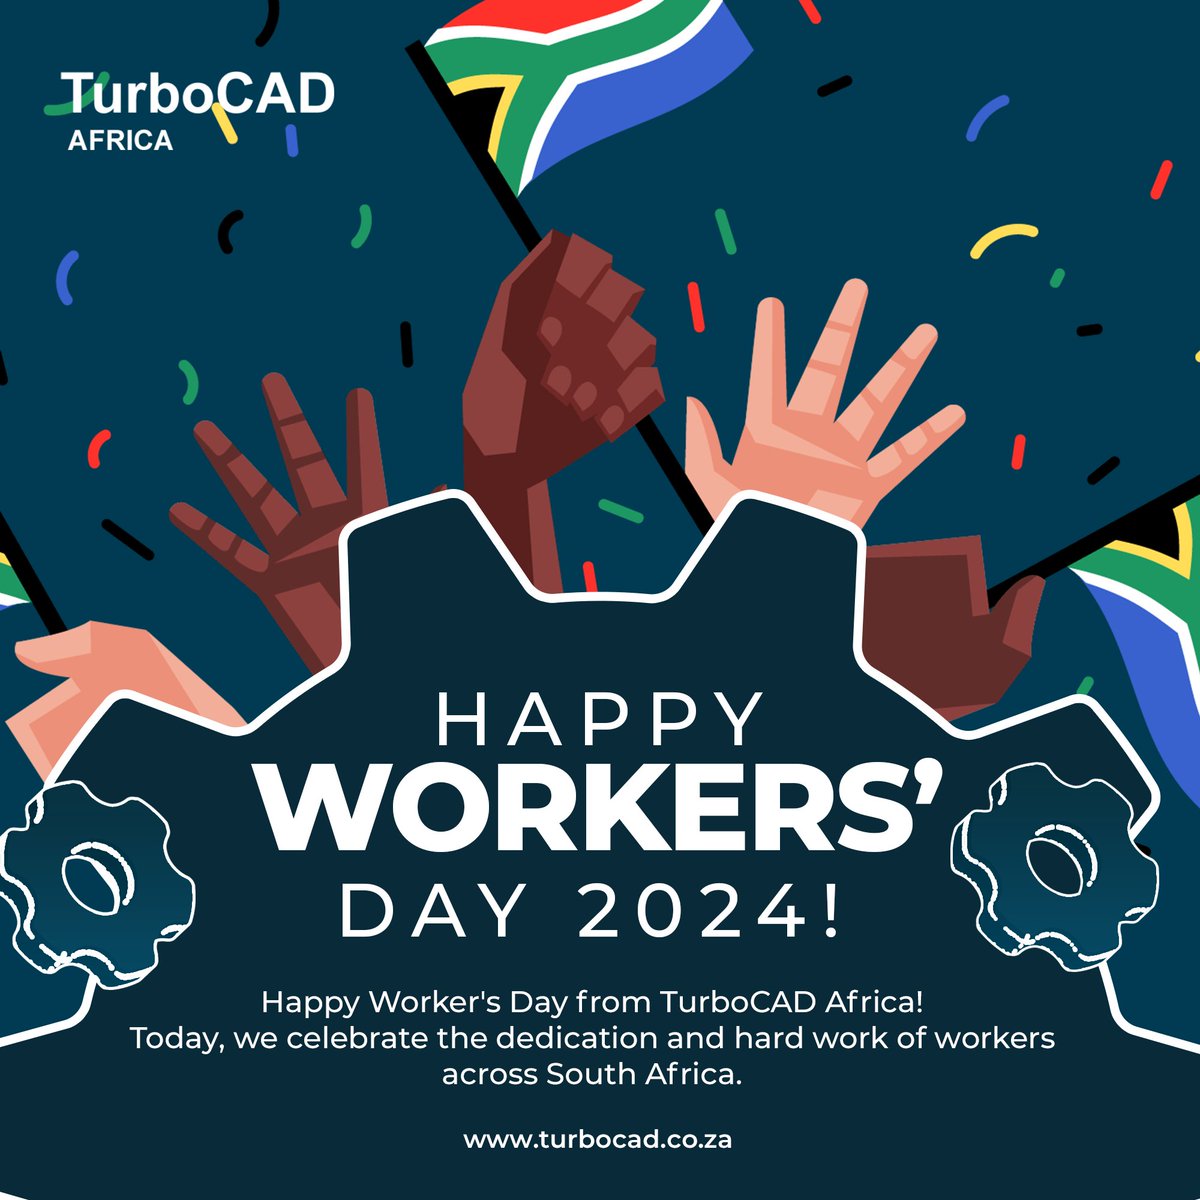 🇿🇦 Happy Worker's Day from TurboCAD Africa! 🇿🇦

Today, we celebrate the hard work and dedication of workers across South Africa. 

#Workersday #WorkersDay2024